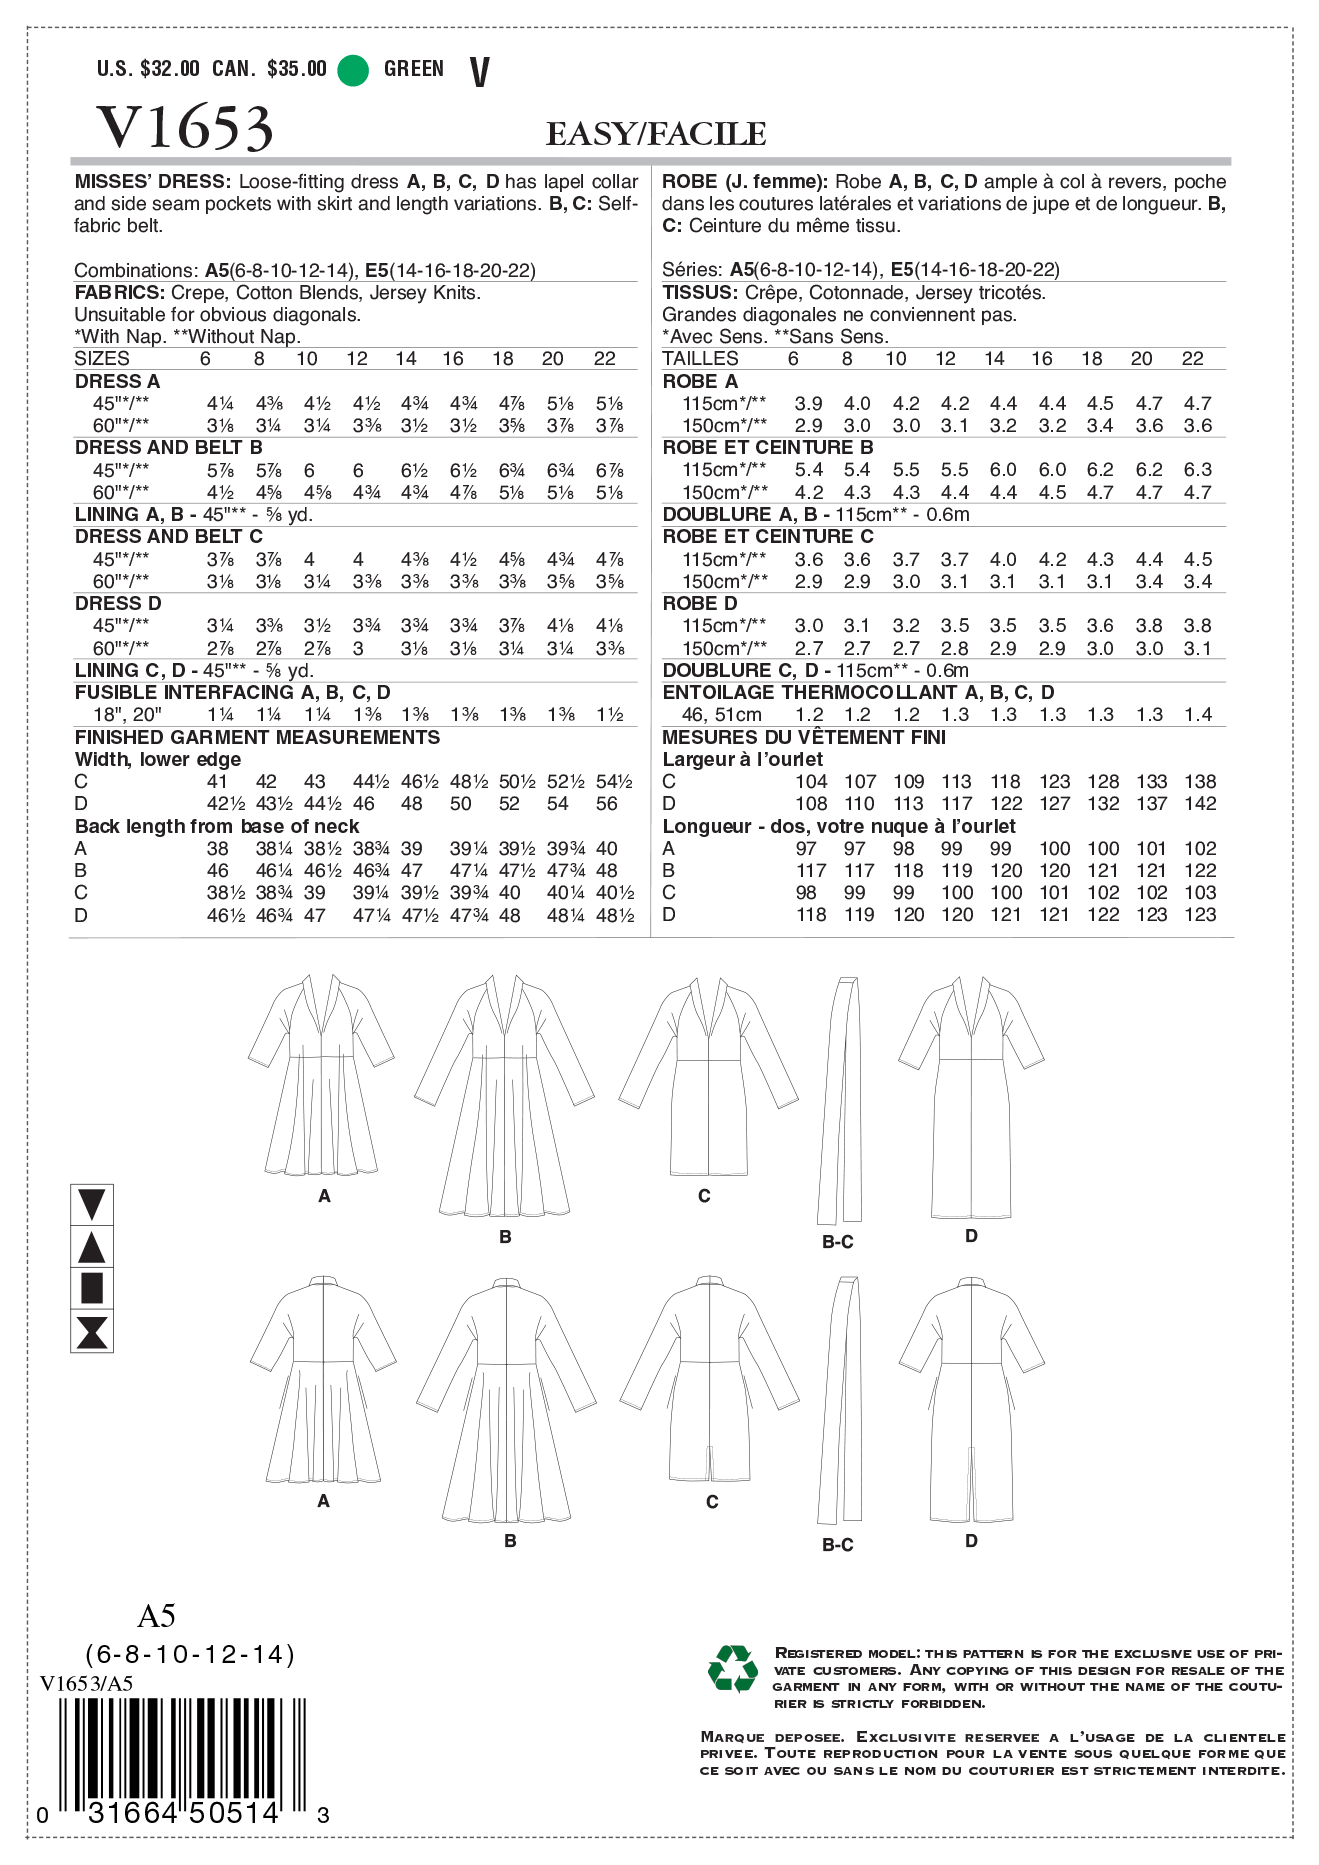 Vogue Sewing Pattern Misses' Dress 1653 A5 (Sizes 6-14)